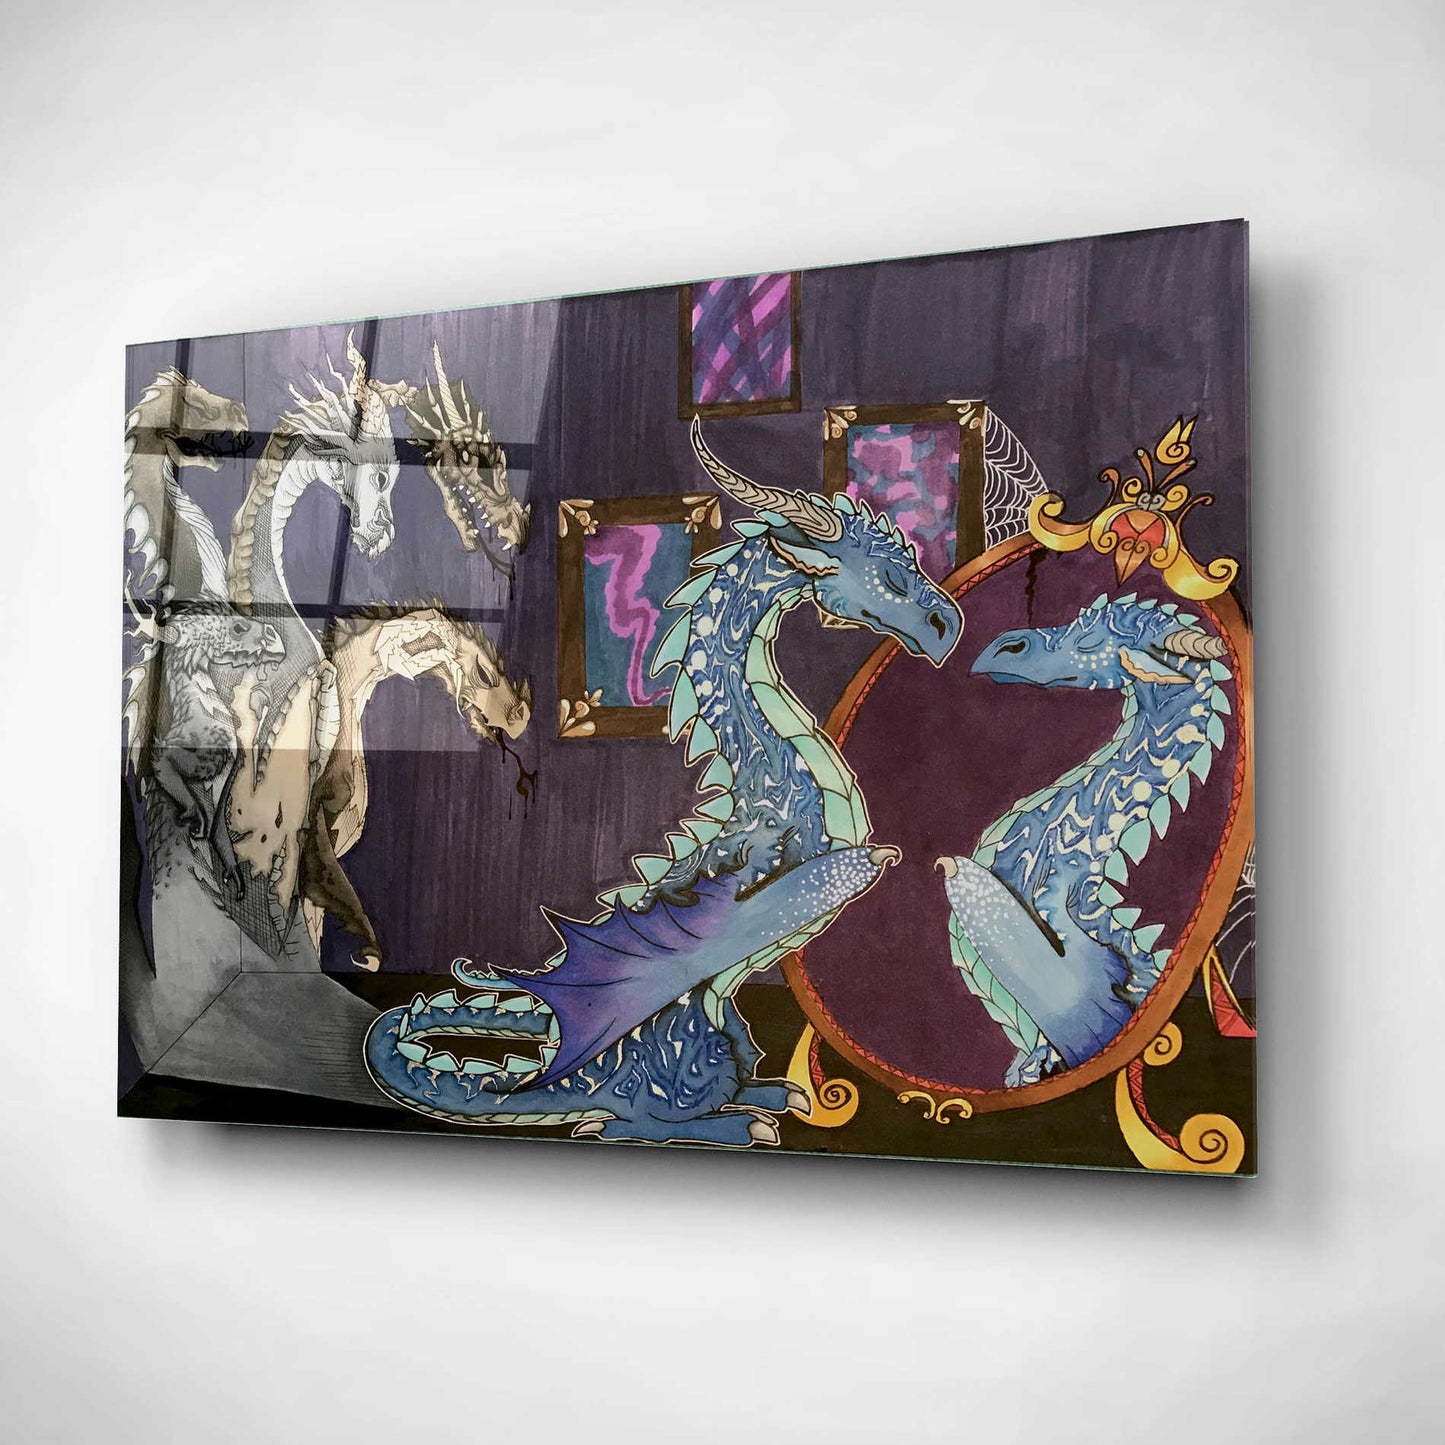 Epic Art 'Dragon in the Mirror' by Avery Multer, Acrylic Glass Wall Art,24x16